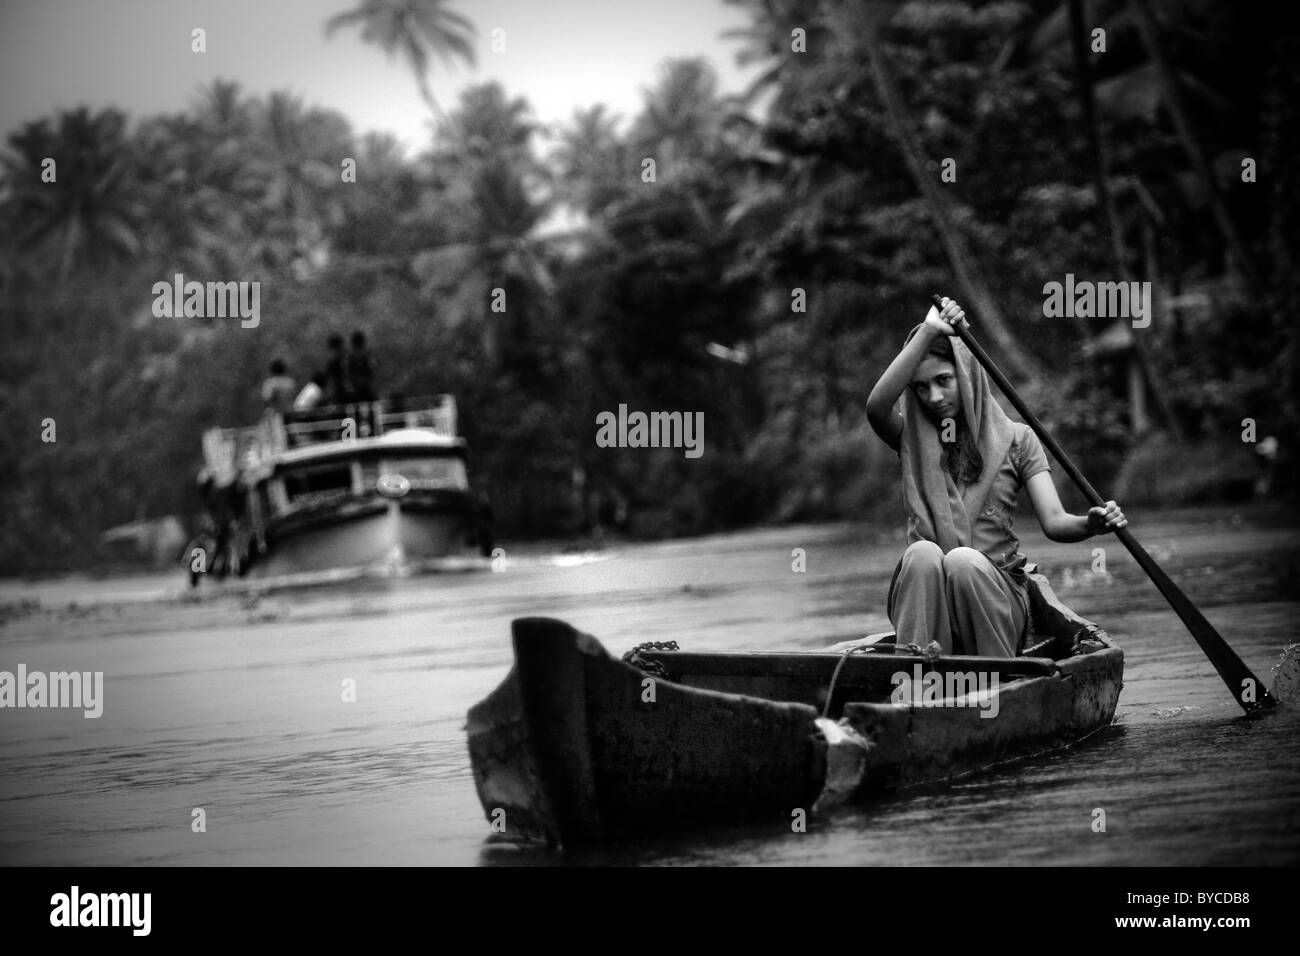 A woman crosses a river in a traditional wooden canoe in the backwaters near Alappuzha (a.k.a. Alleppey) in Kerala, India. Stock Photo